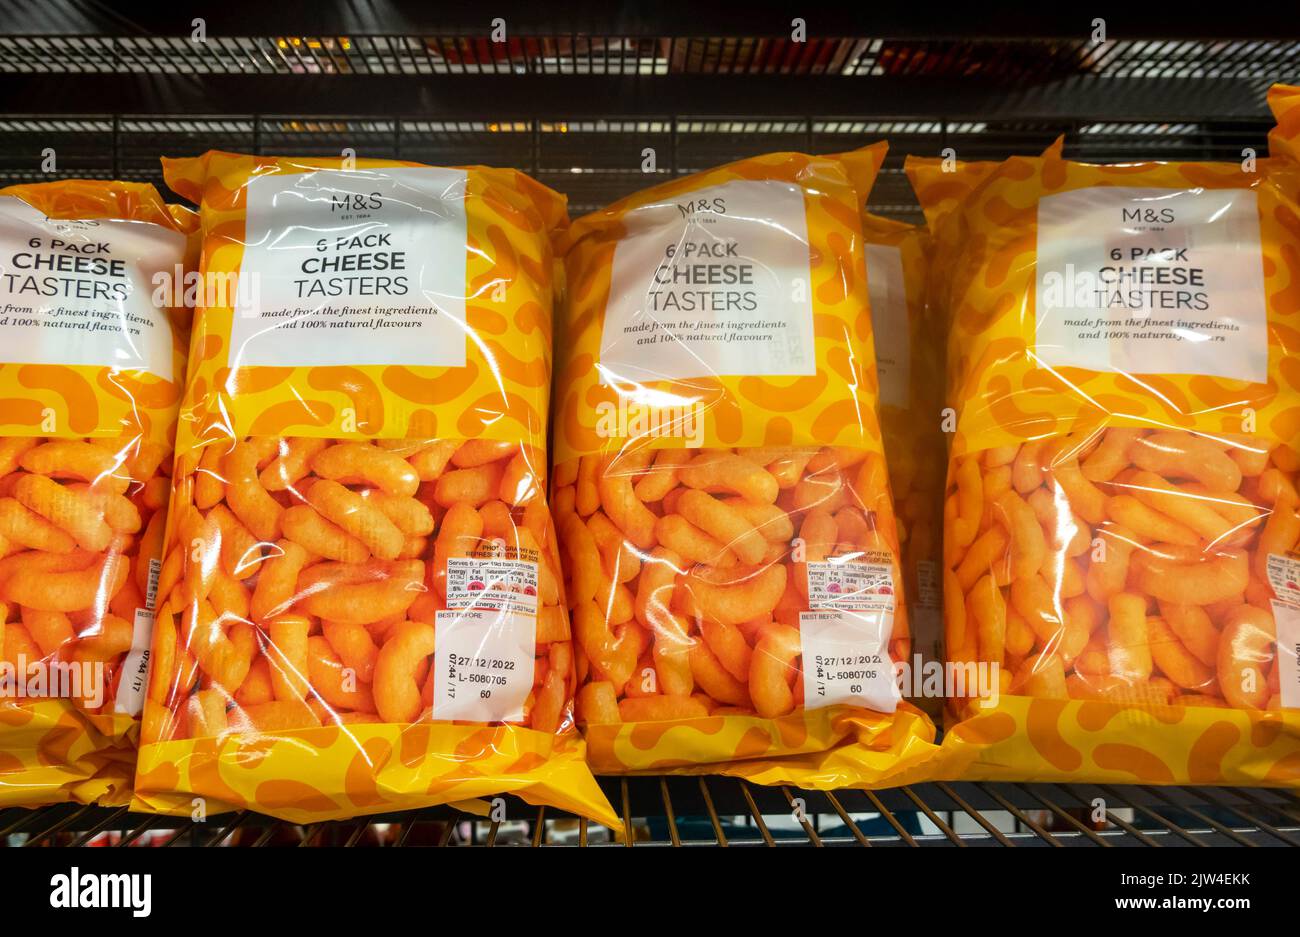 6 pack Cheese Tasters on shelf at M&S in Liverpool Stock Photo